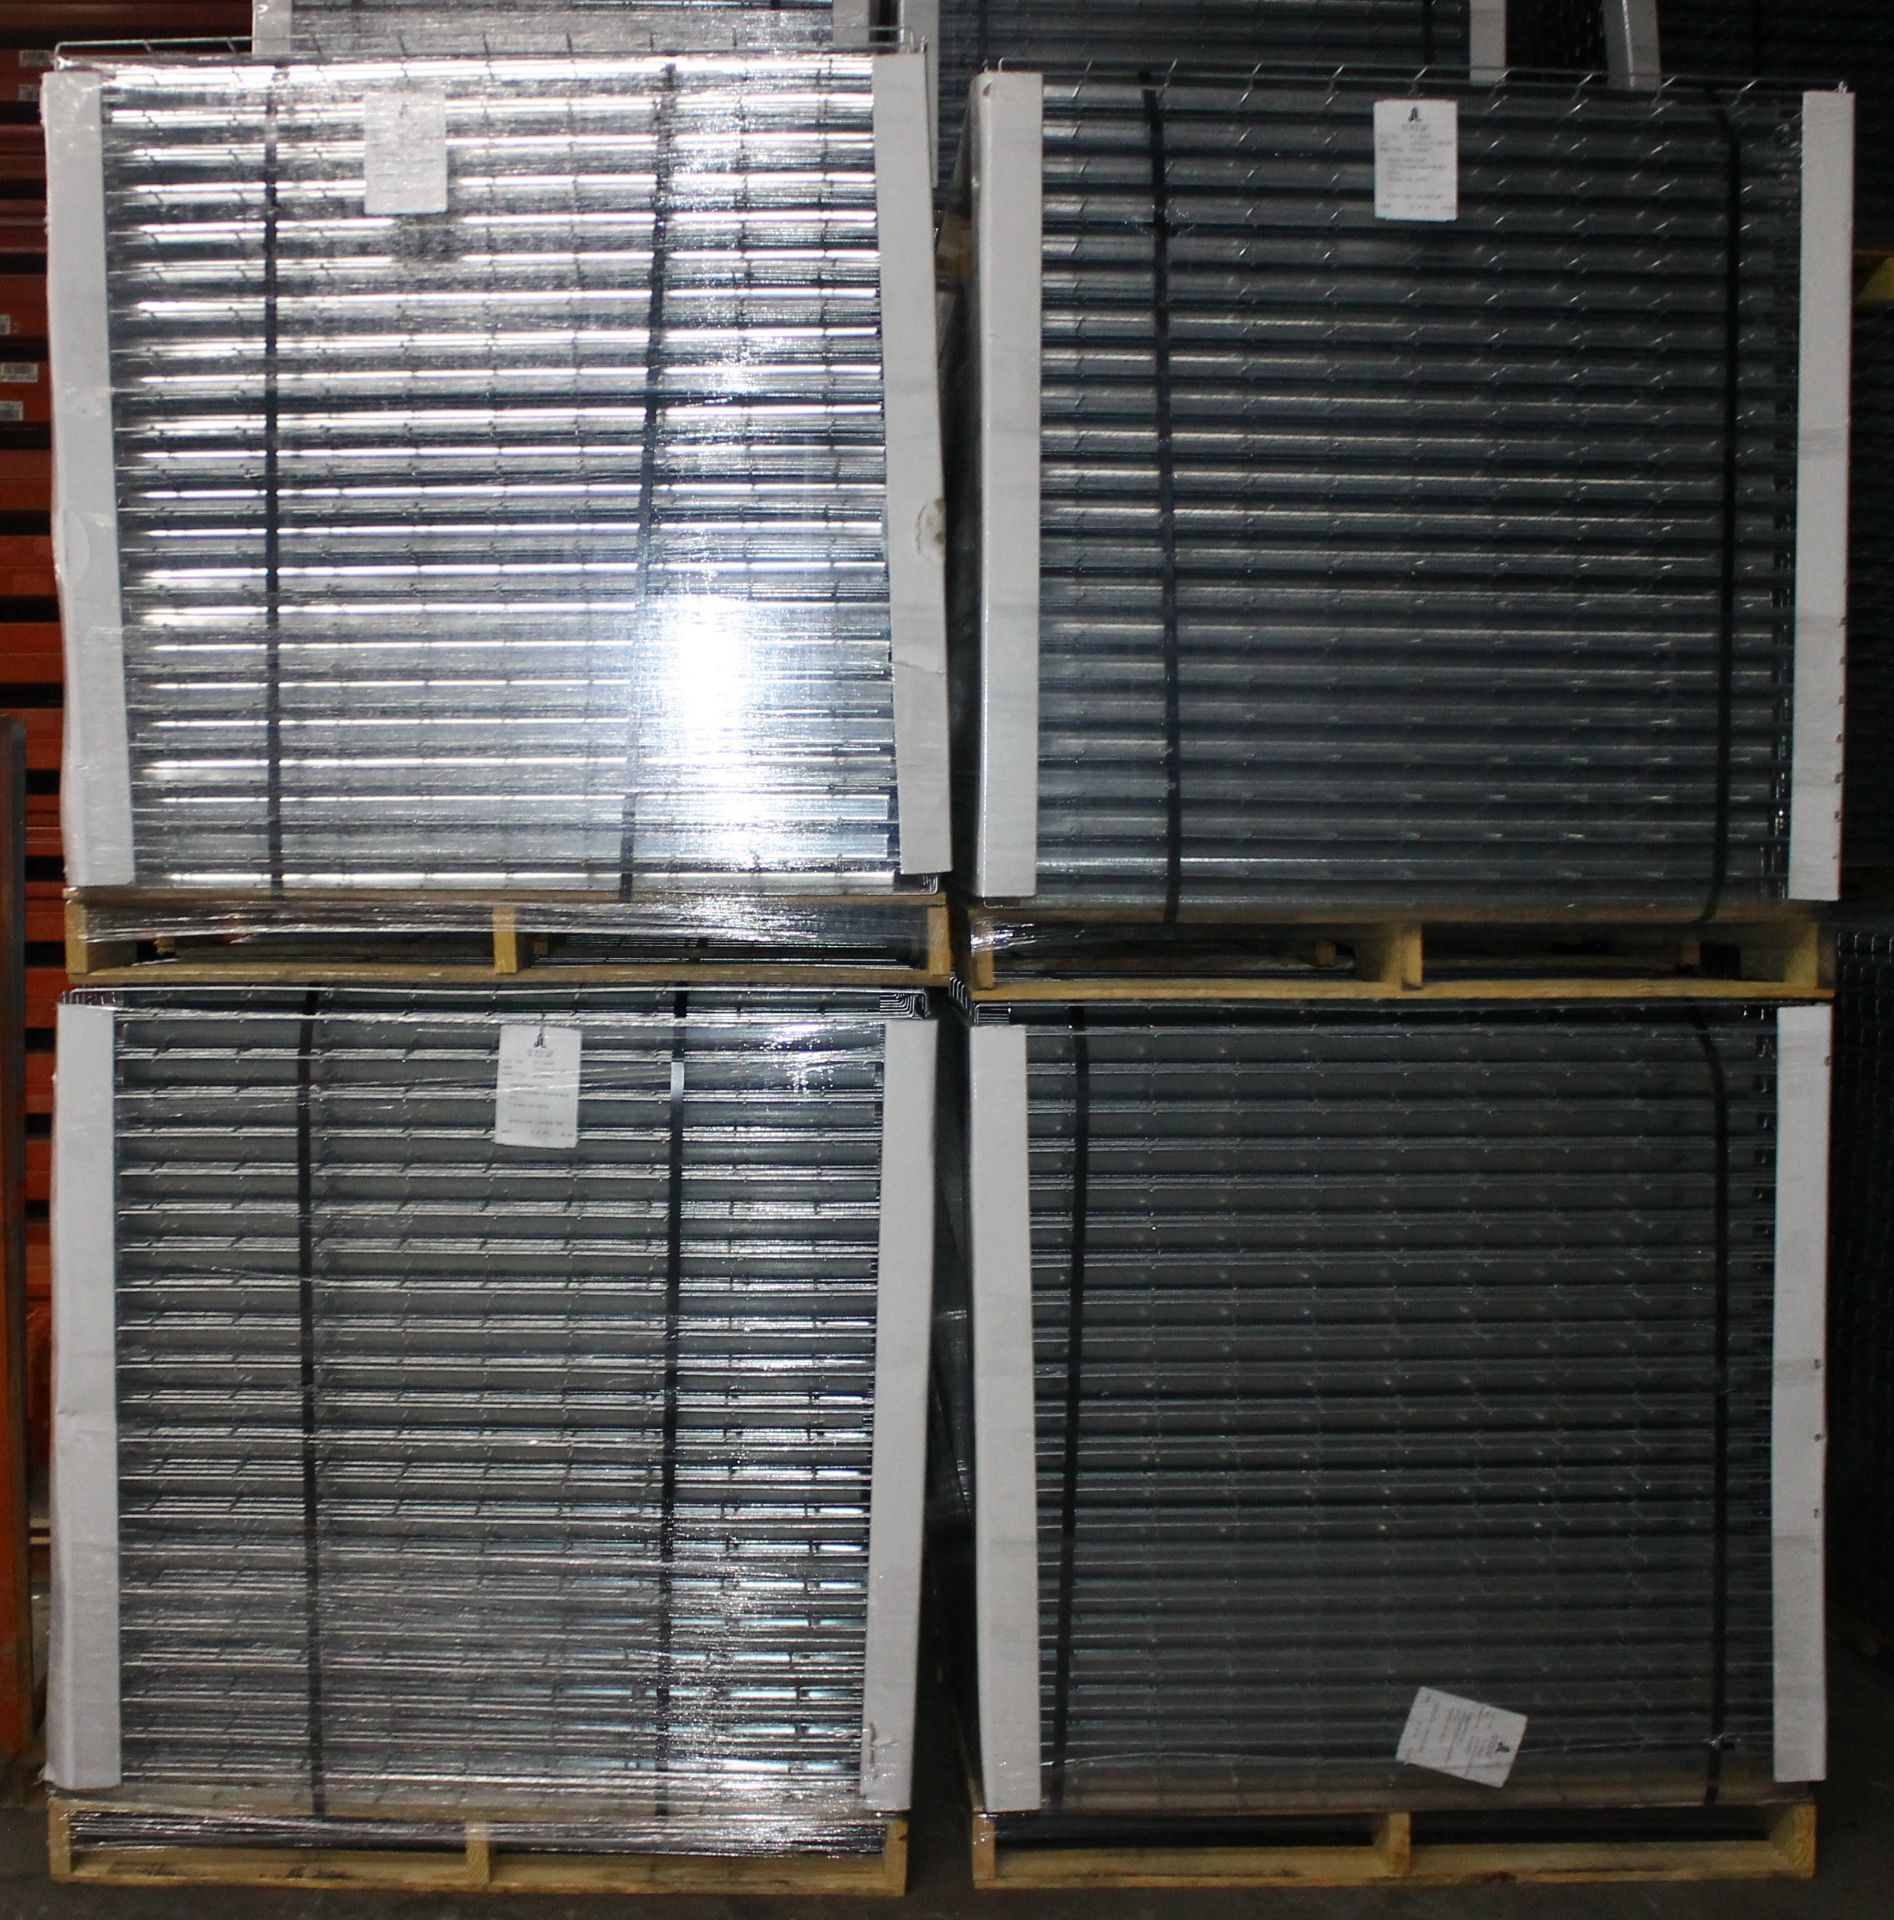 NEW 120 PCS OF STANDARD 42" X 53" WIREDECK - 2050 LBS CAPACITY